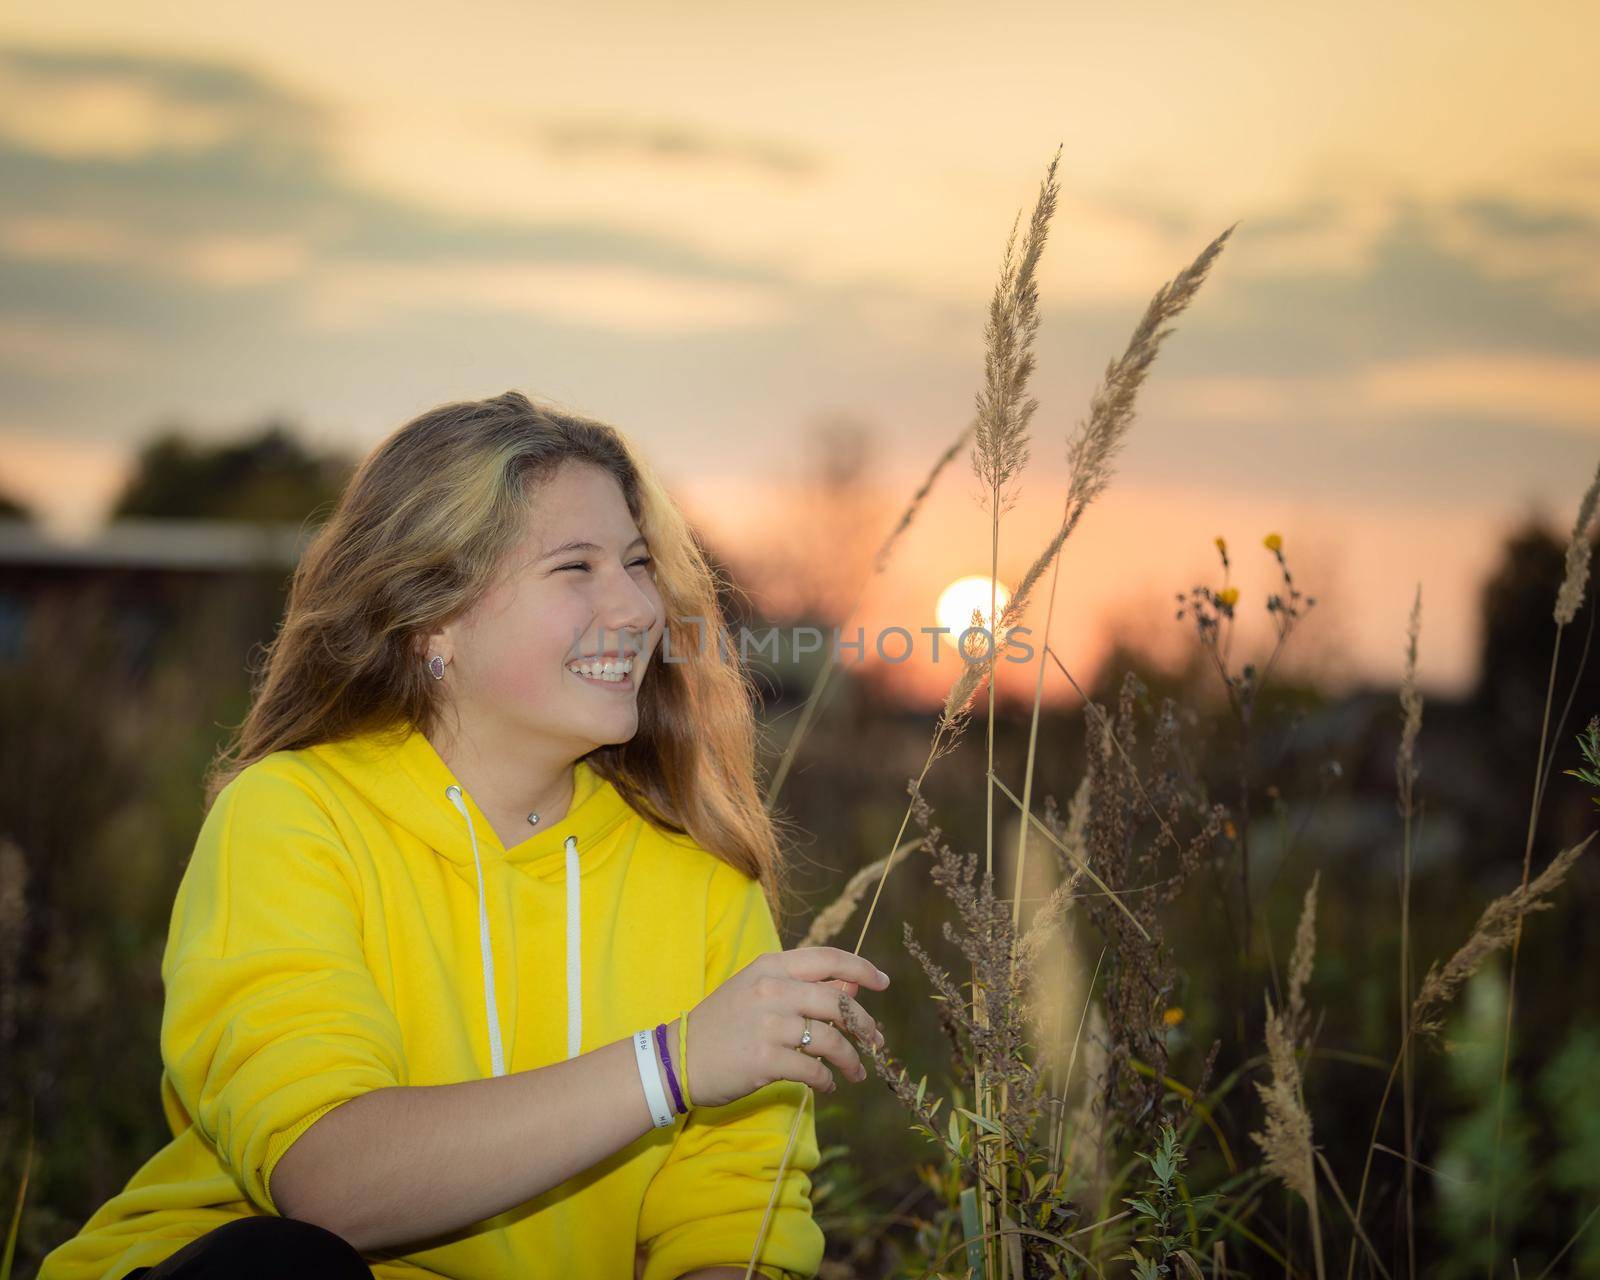 A young girl on a meadow with tall grass in the rays of the setting sun. by Yurich32